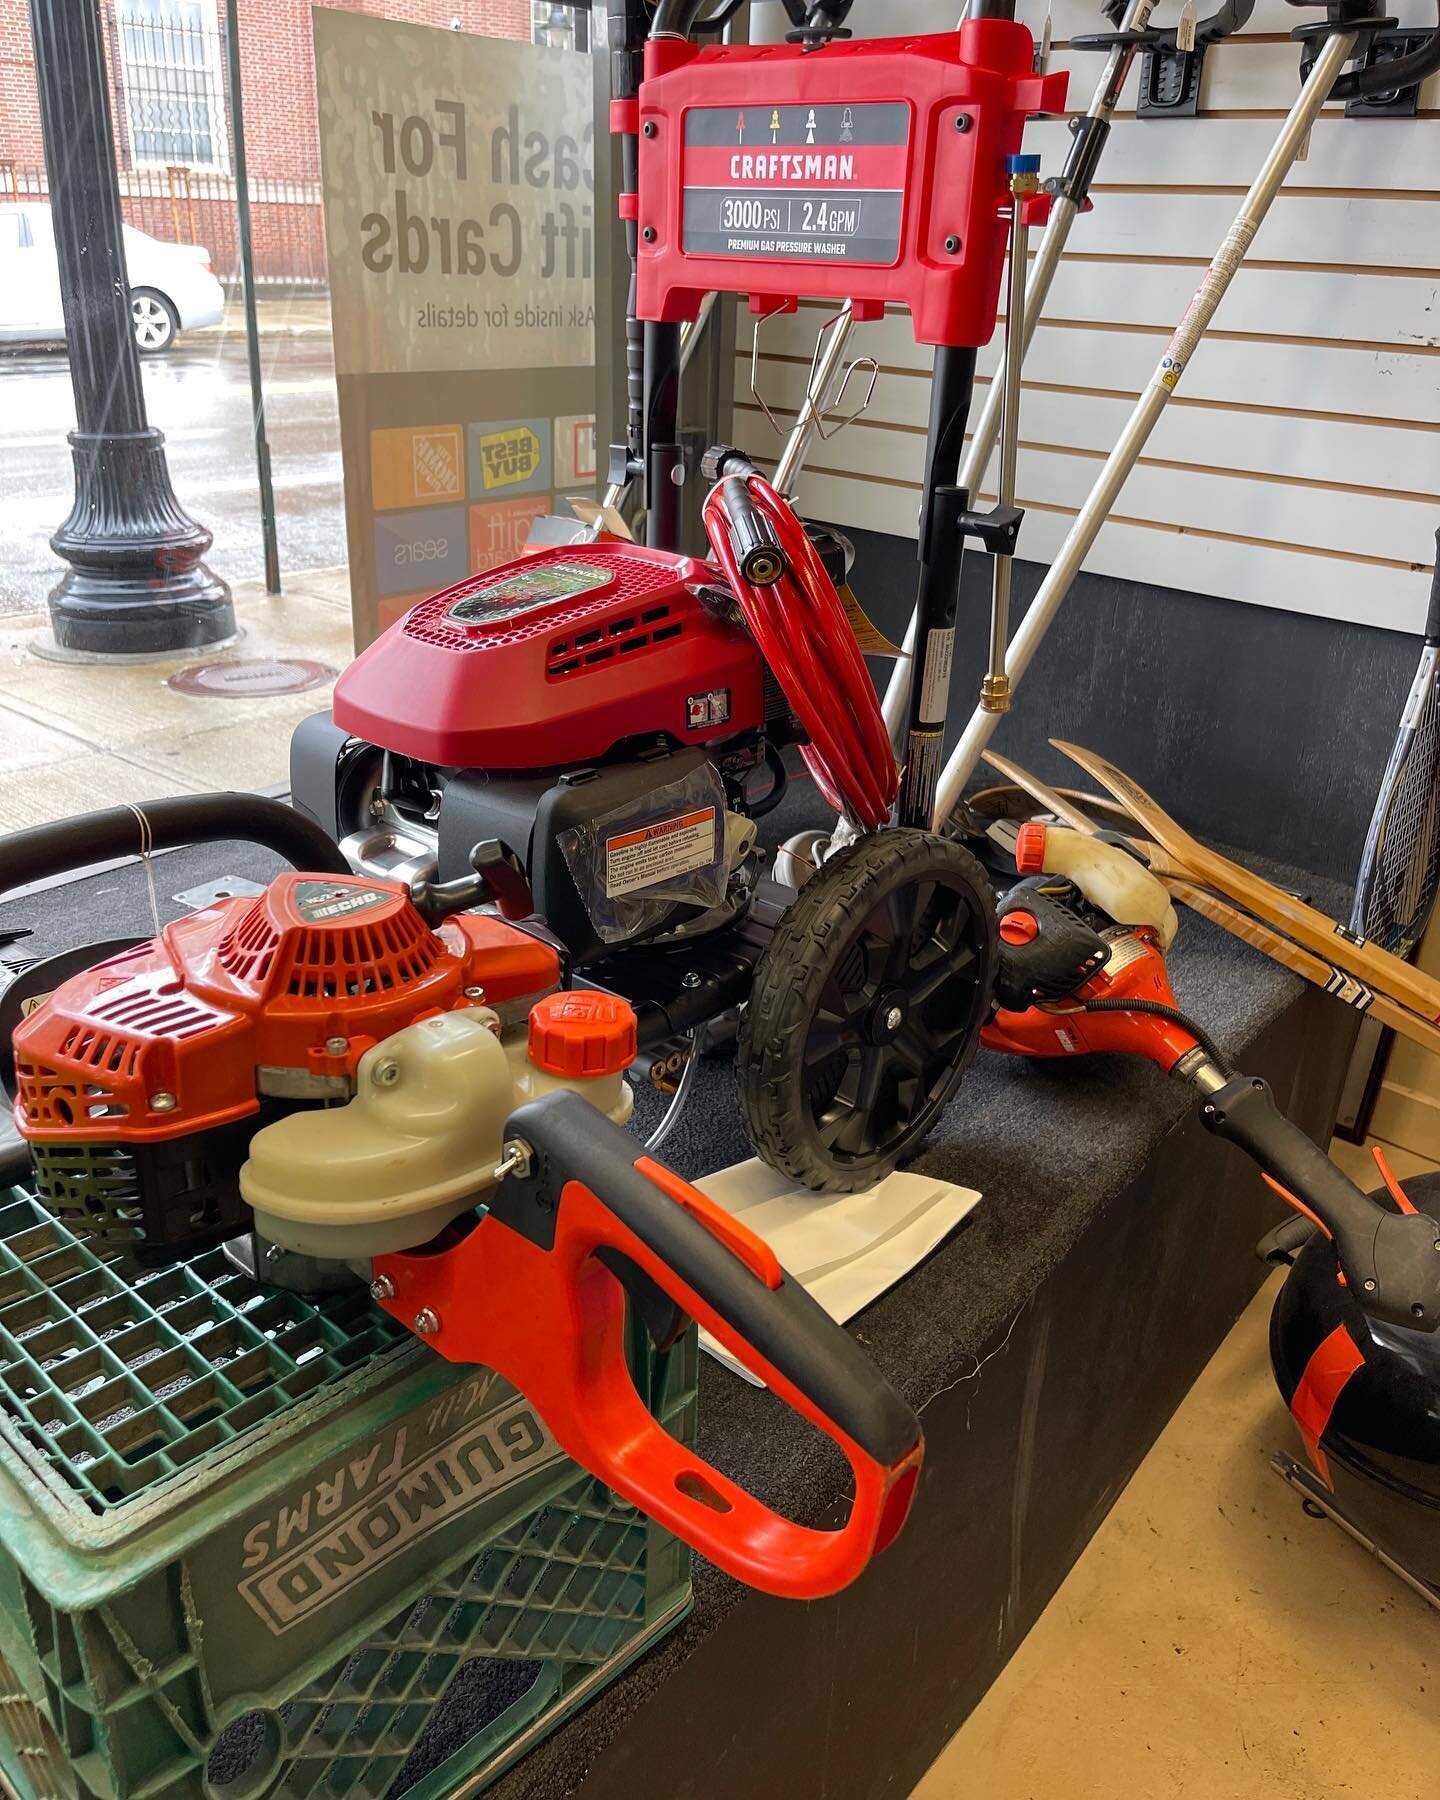 Spring has sprung!

Check out our inventory of brand new Echo lawn trimmers, Craftsman power washer, and a wide assortment of battery powered lawn equipment.

Don't miss these great deals!